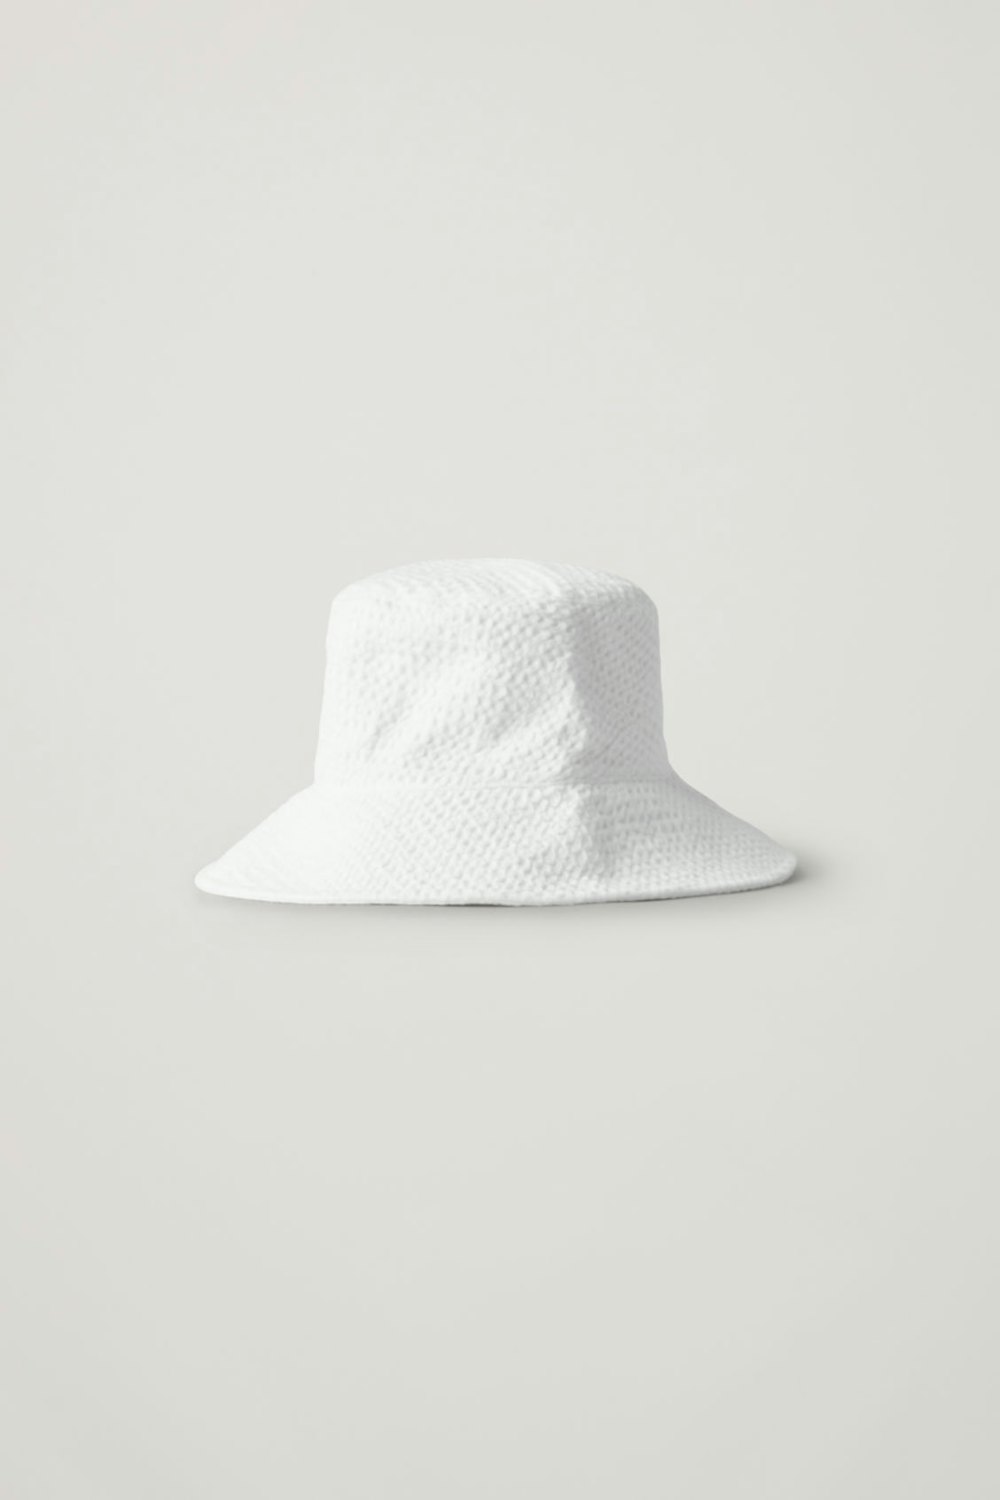 4 Hat Trends To Wear All Summer, From Bucket Hats To Visors